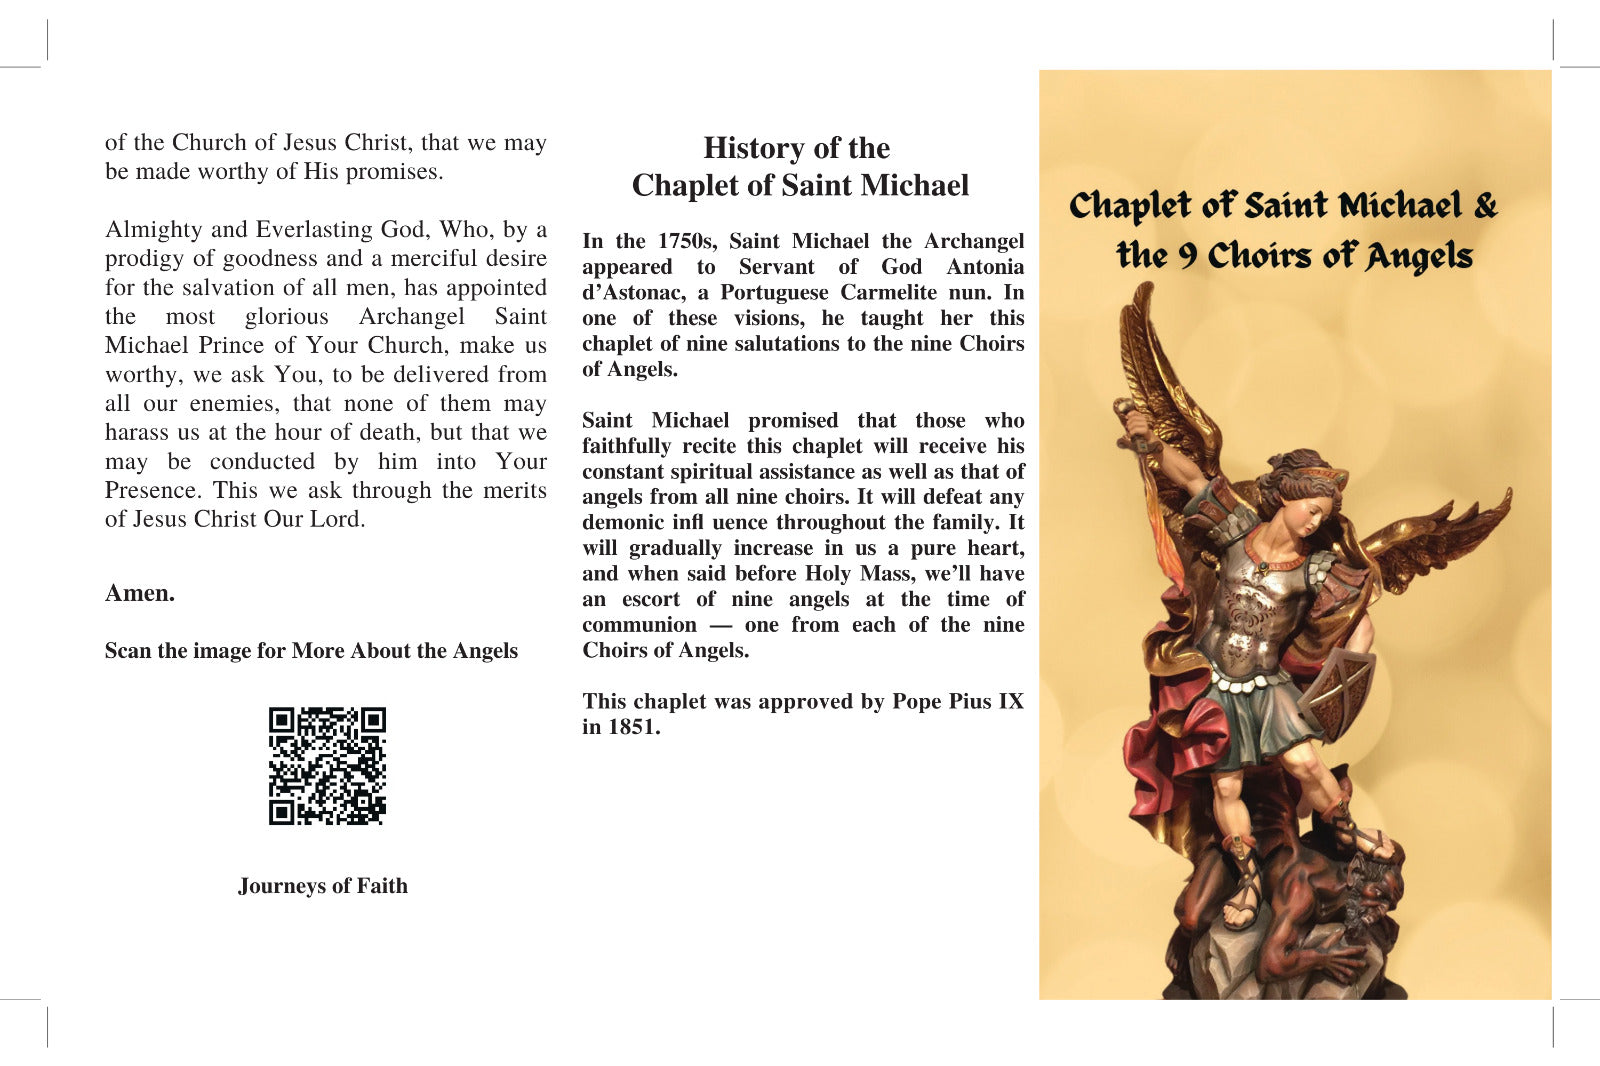 Chaplet of Saint Michael & the Nine Choirs of Angels Trifold Prayer Cards - Bob and Penny Lord